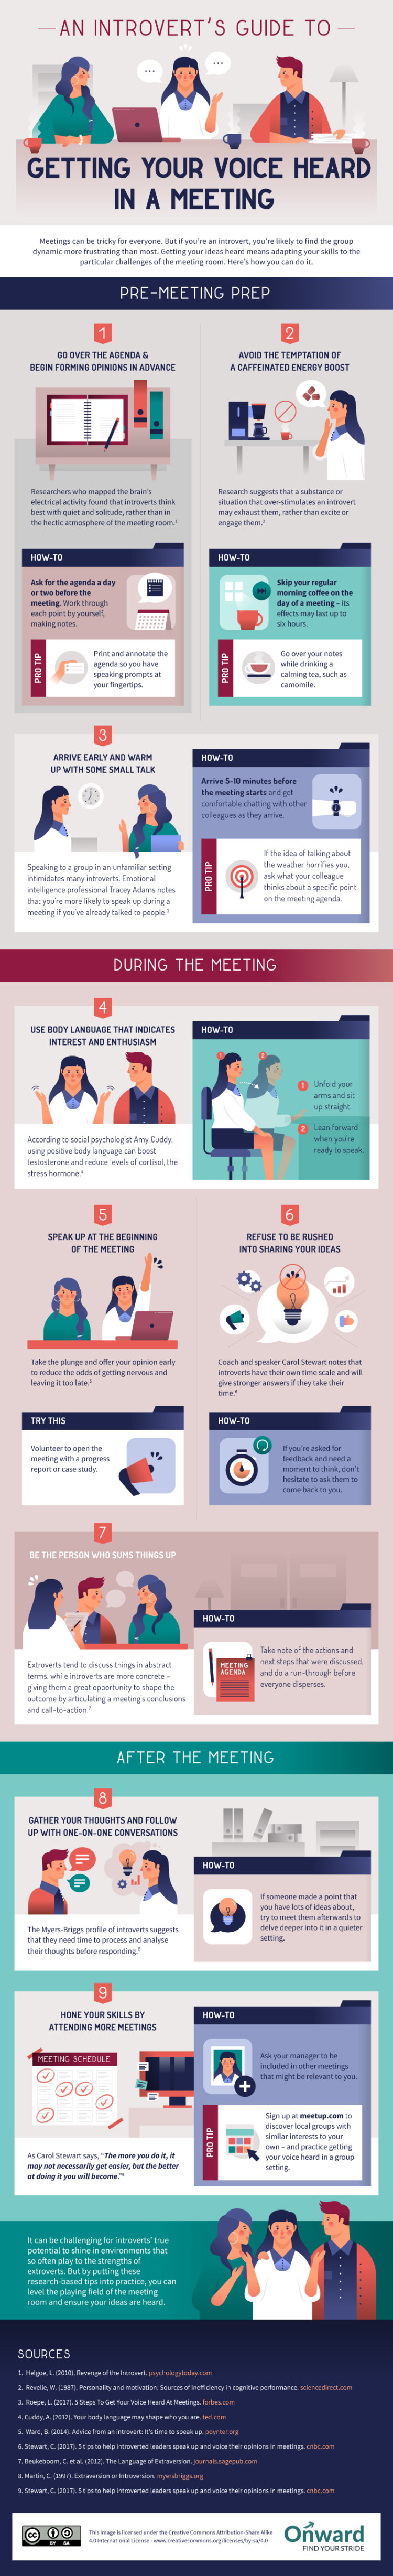 An introvert's guide to getting your voice heard in a meeting infographic